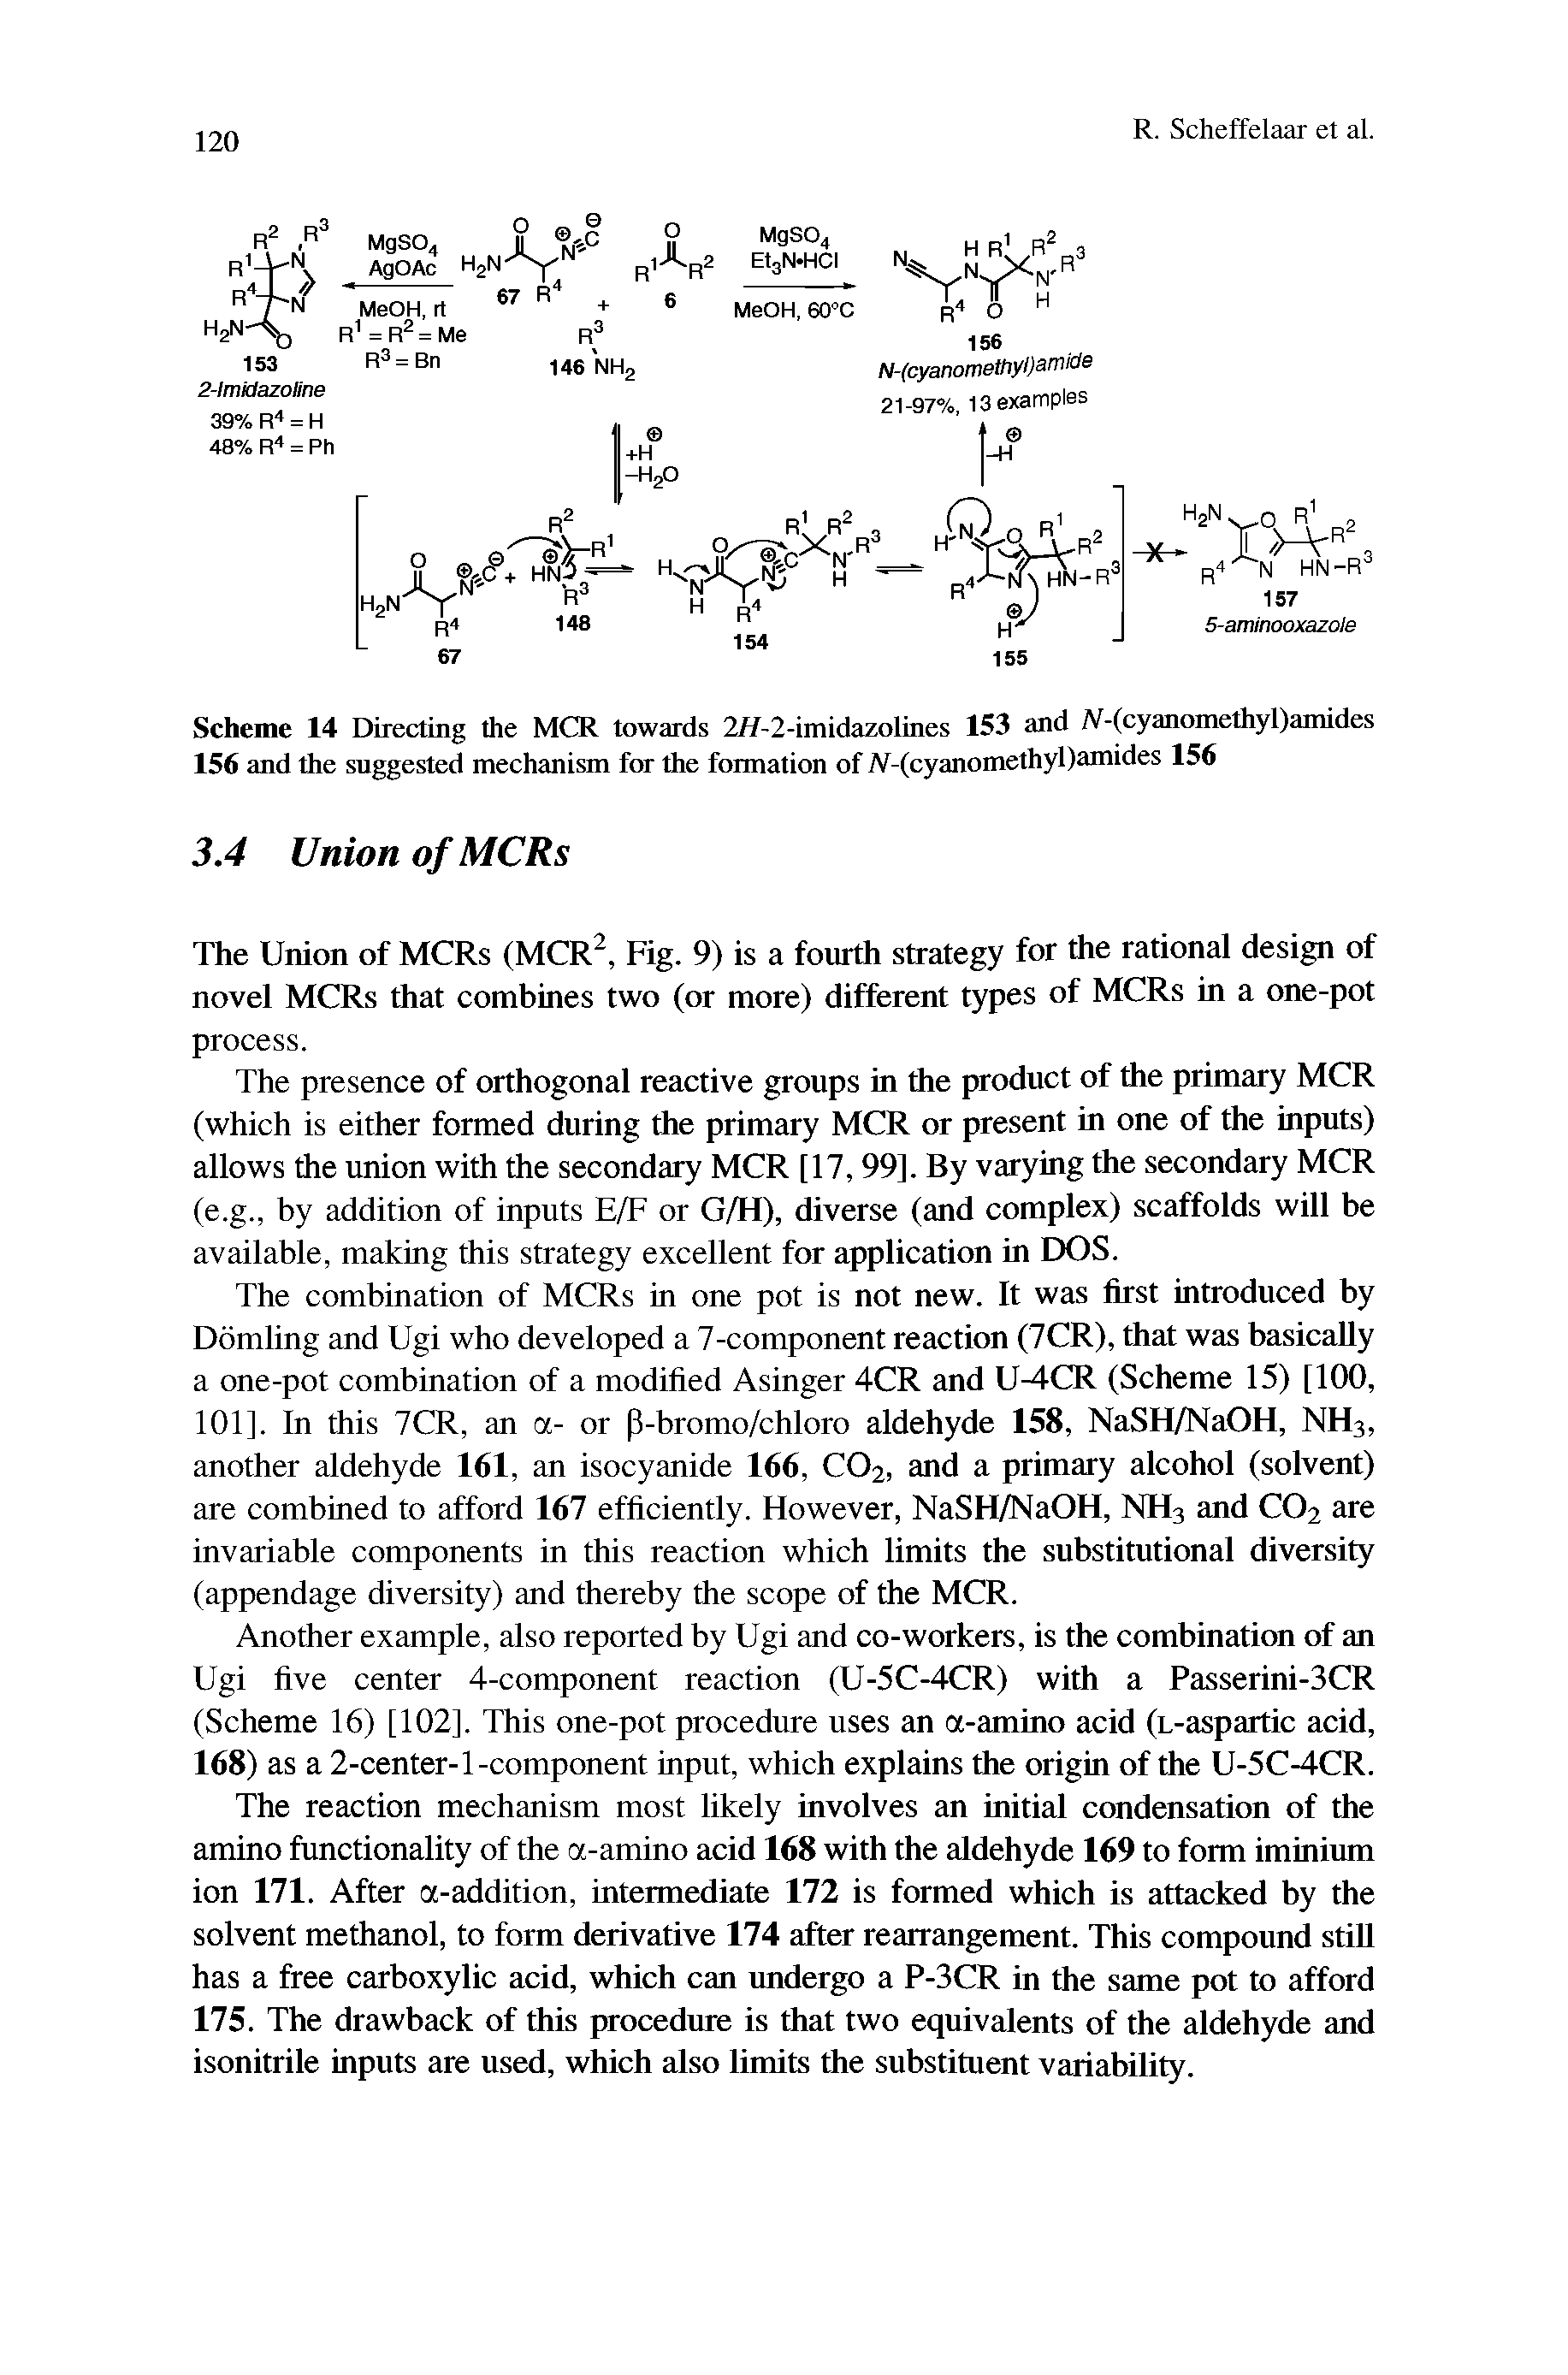 Scheme 14 Directing the MCR towards 2//-2-imidazolines 153 and A -(cyanomethyl)anudes 156 and the suggested mechanism for the formation of W-(cyanomethyl)amides 156...